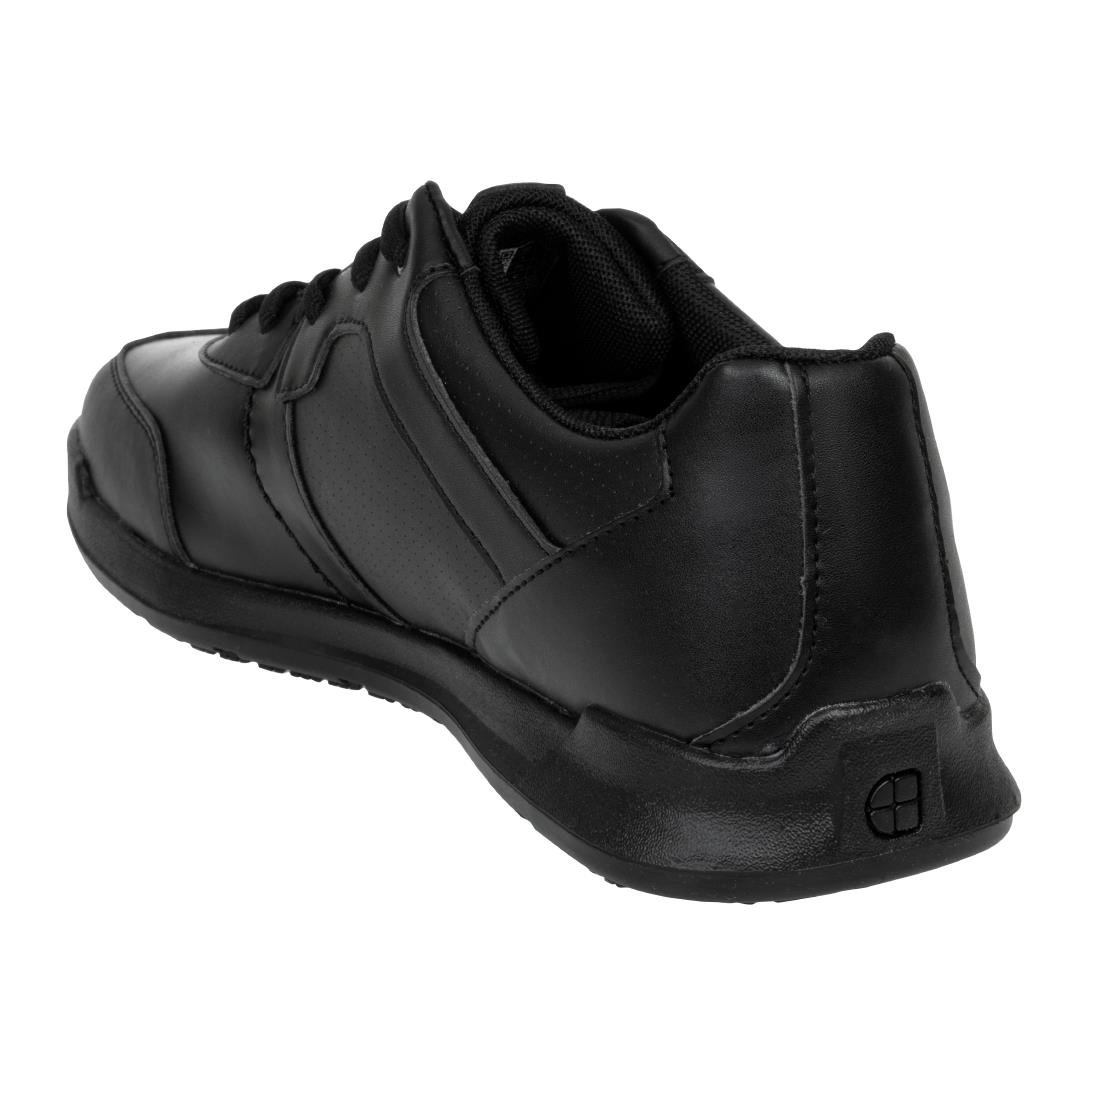 BB585-45 Shoes for Crews Freestyle Trainers Black Size 45